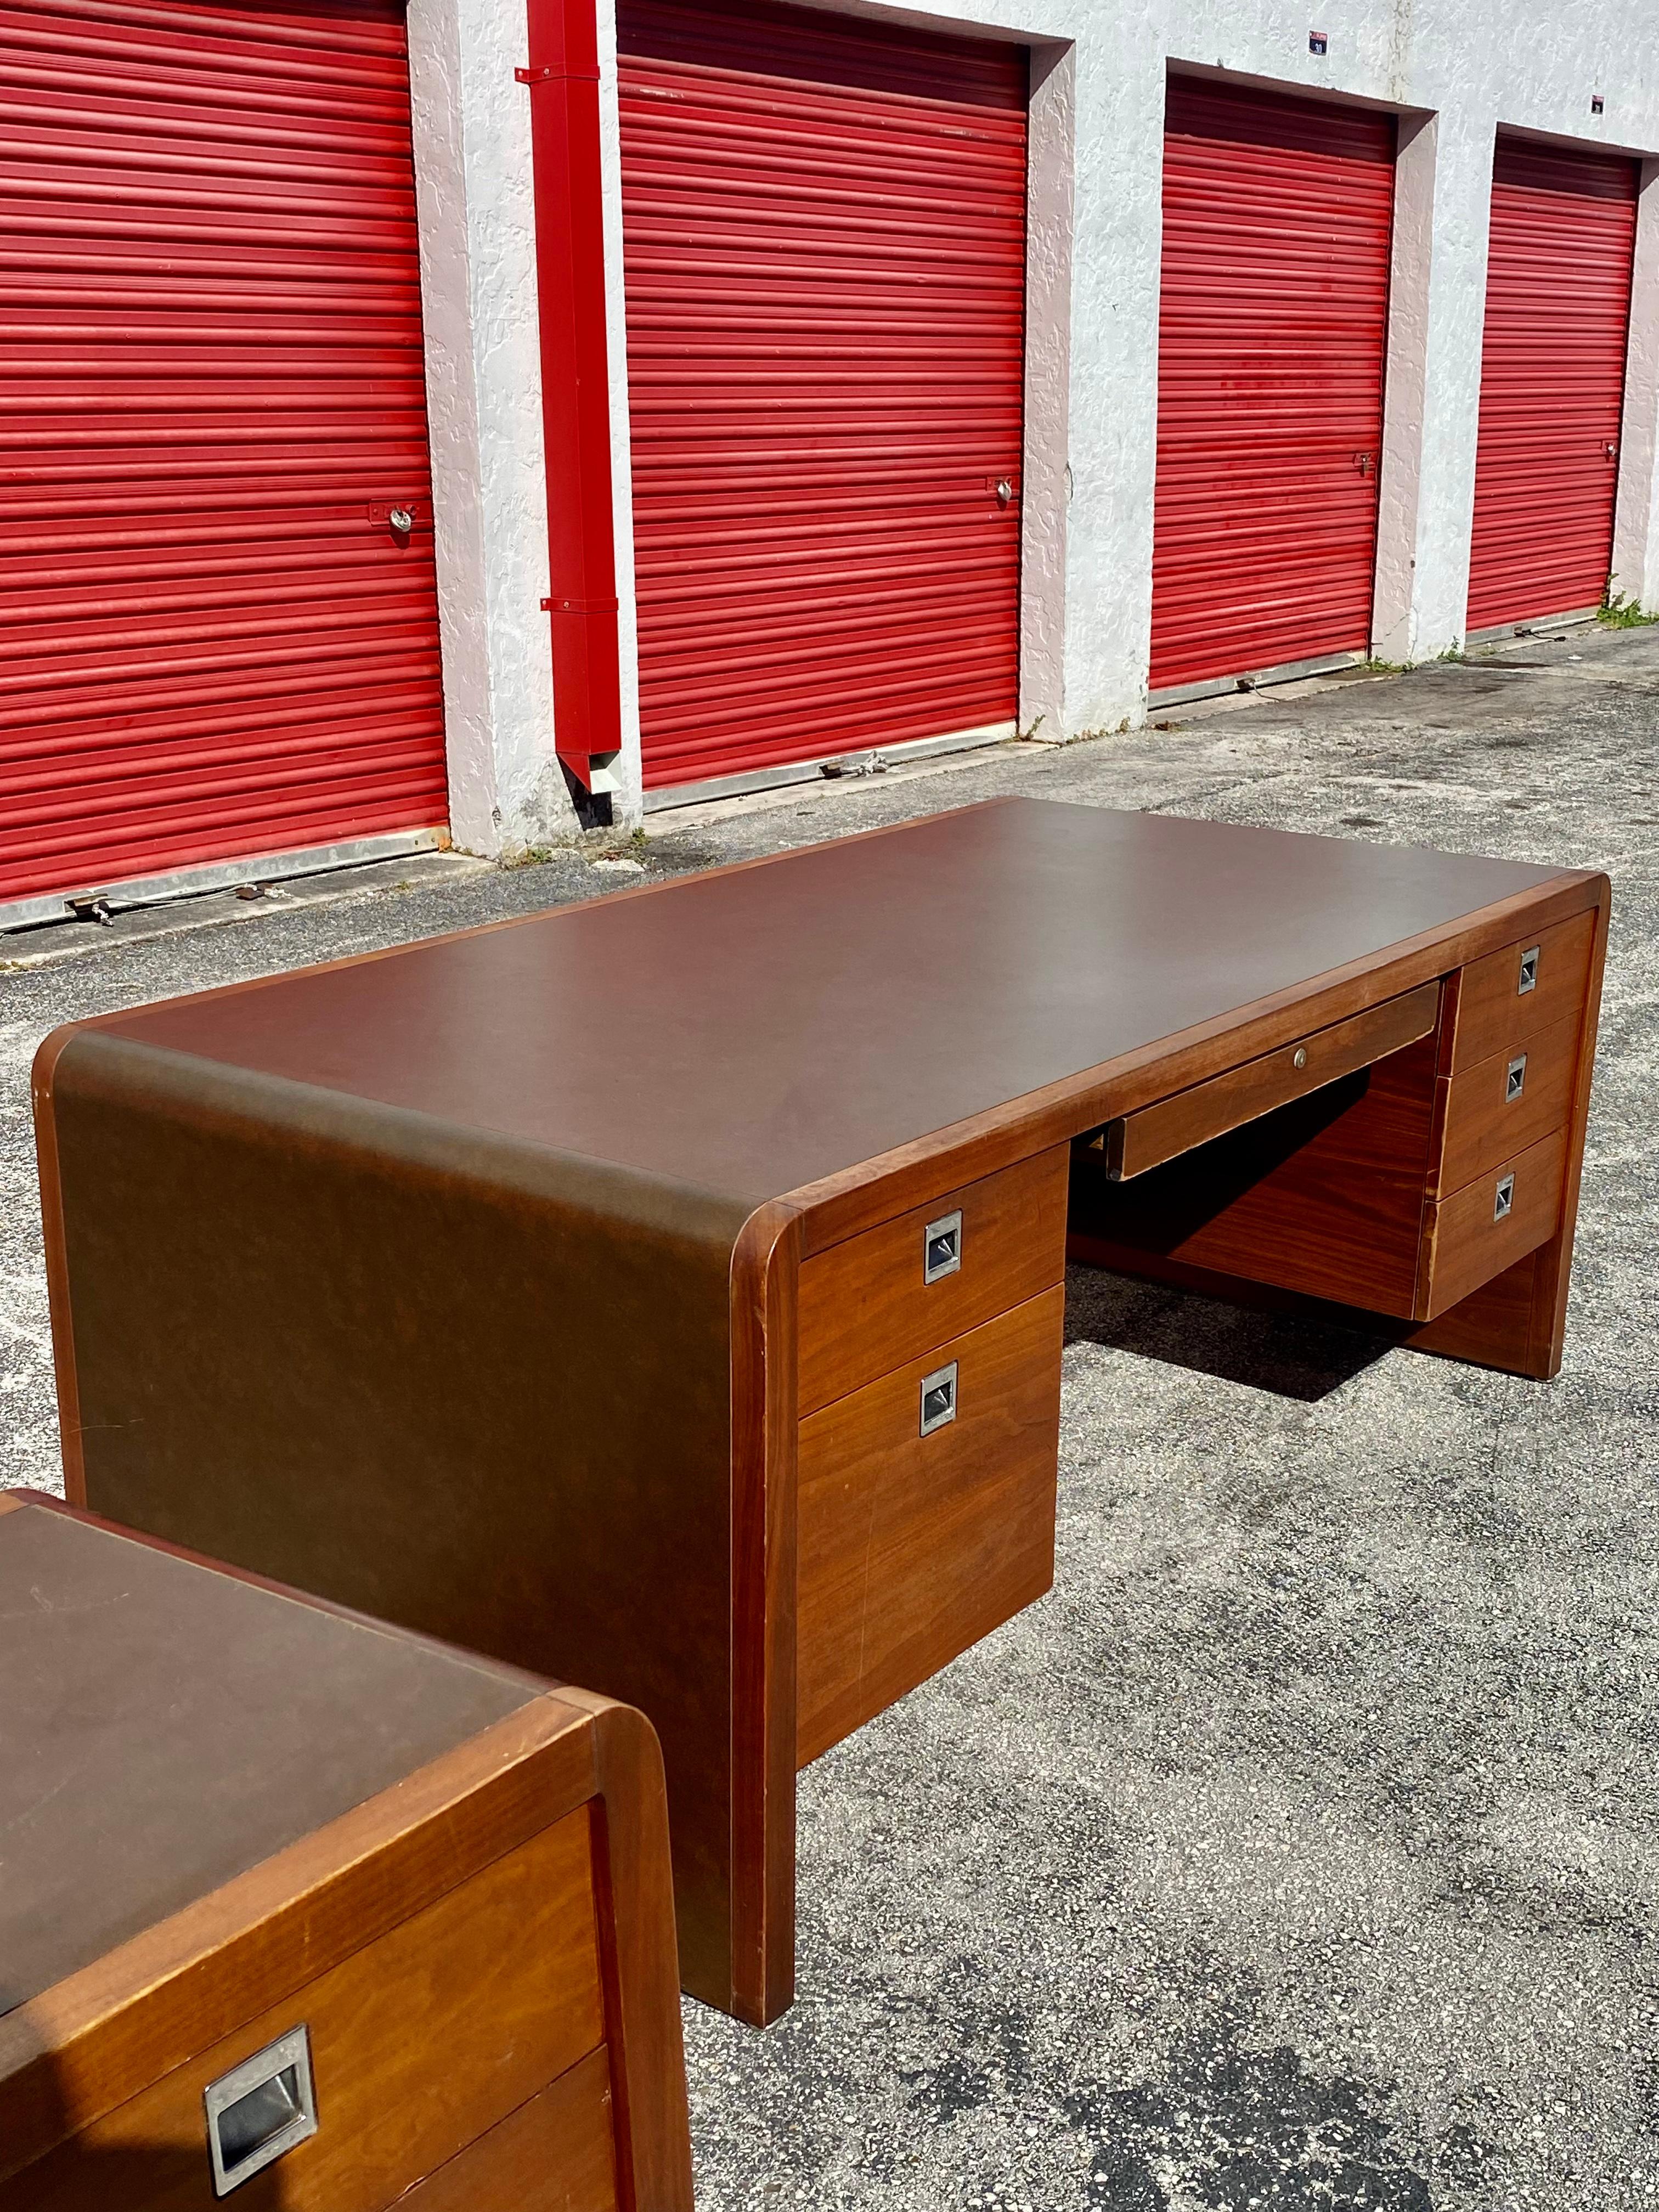 1970s Walnut Executive Campaign Waterfall Desk And Cabinet, Set of 2 For Sale 4